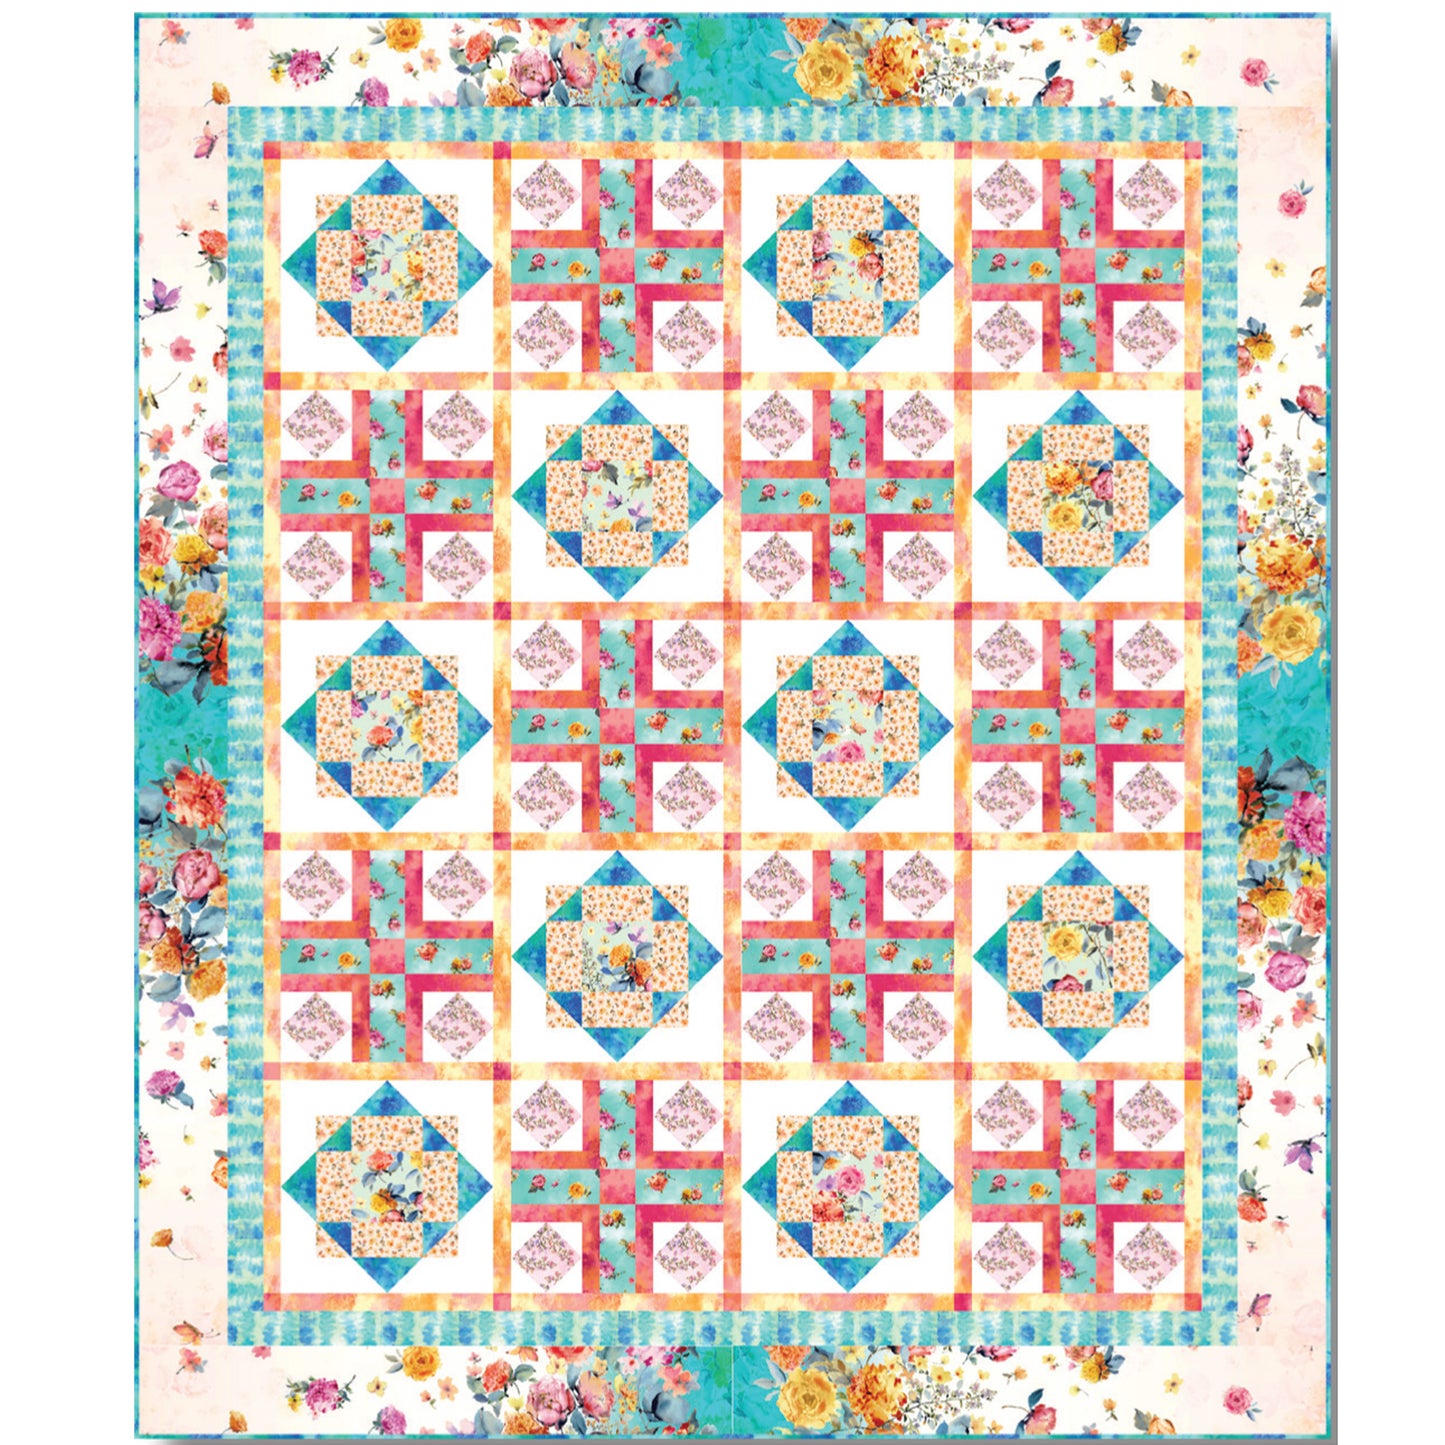 Blooms at the Border Quilt TWW-1008e - Downloadable Pattern